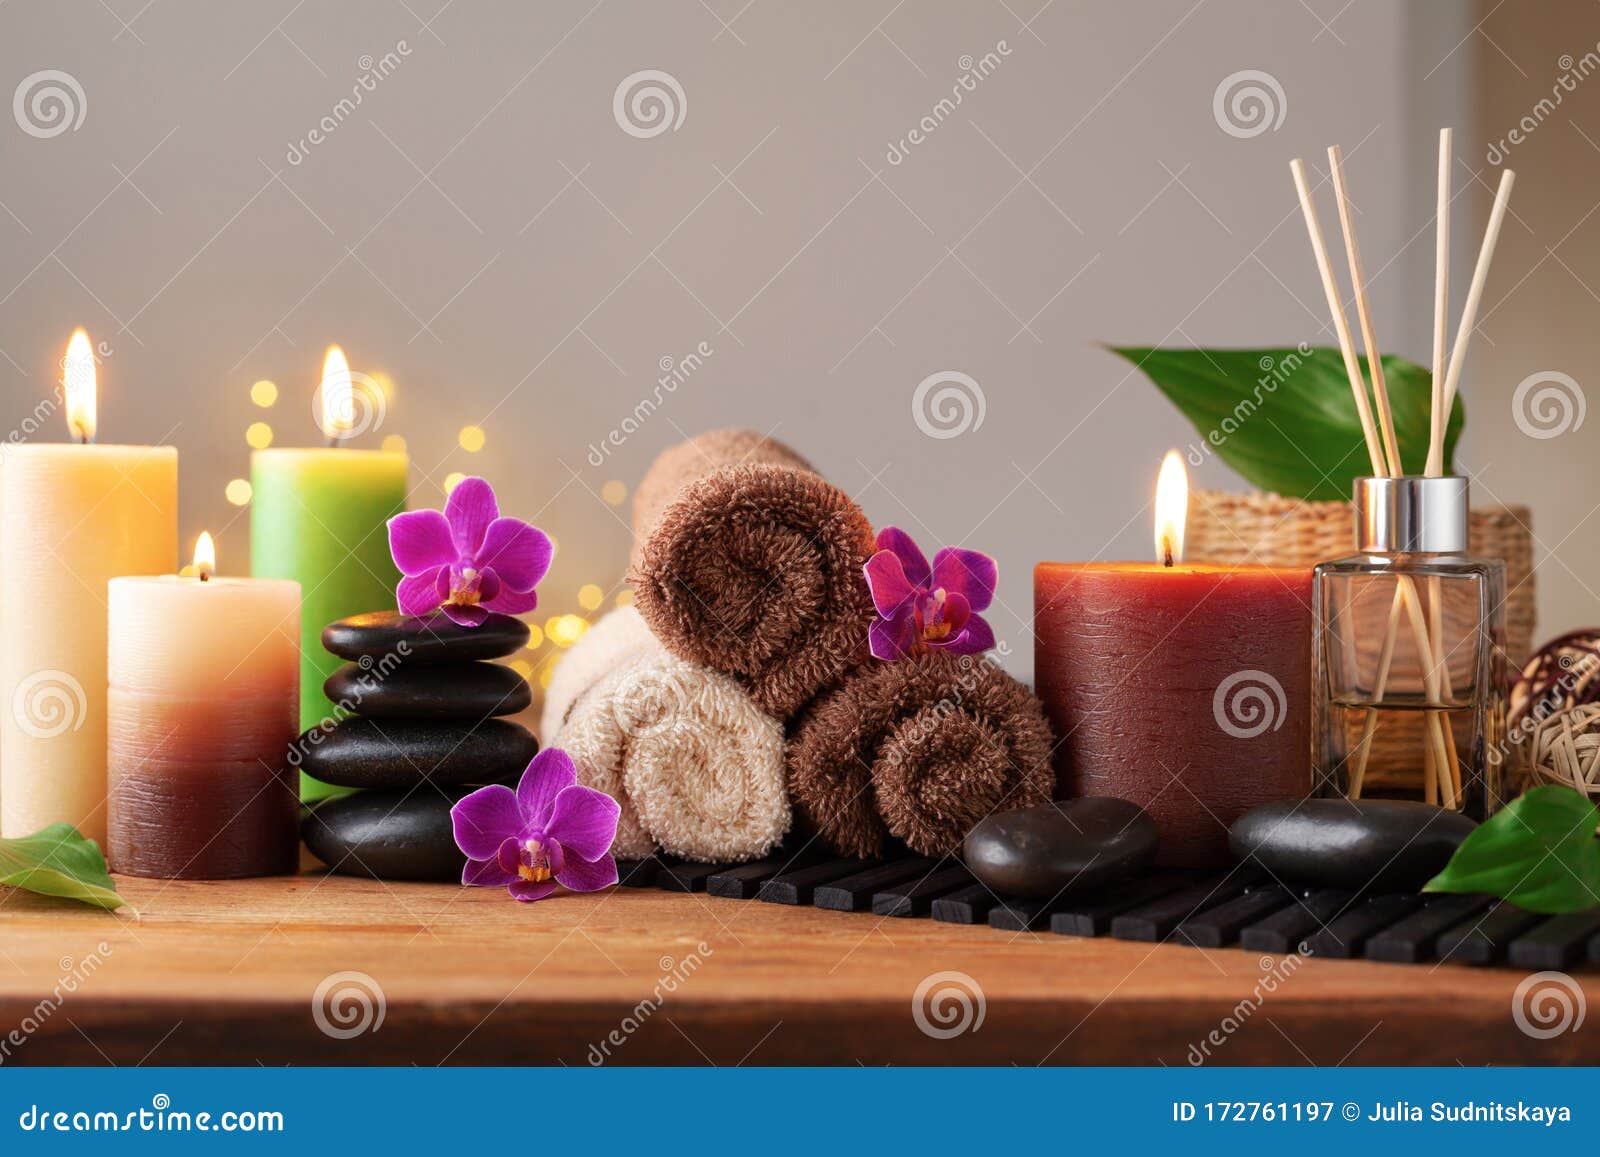 Stones Aromatic Candles and Orchids Blooms Treatment Va Details about   Ambesonne Spa Bedspread 